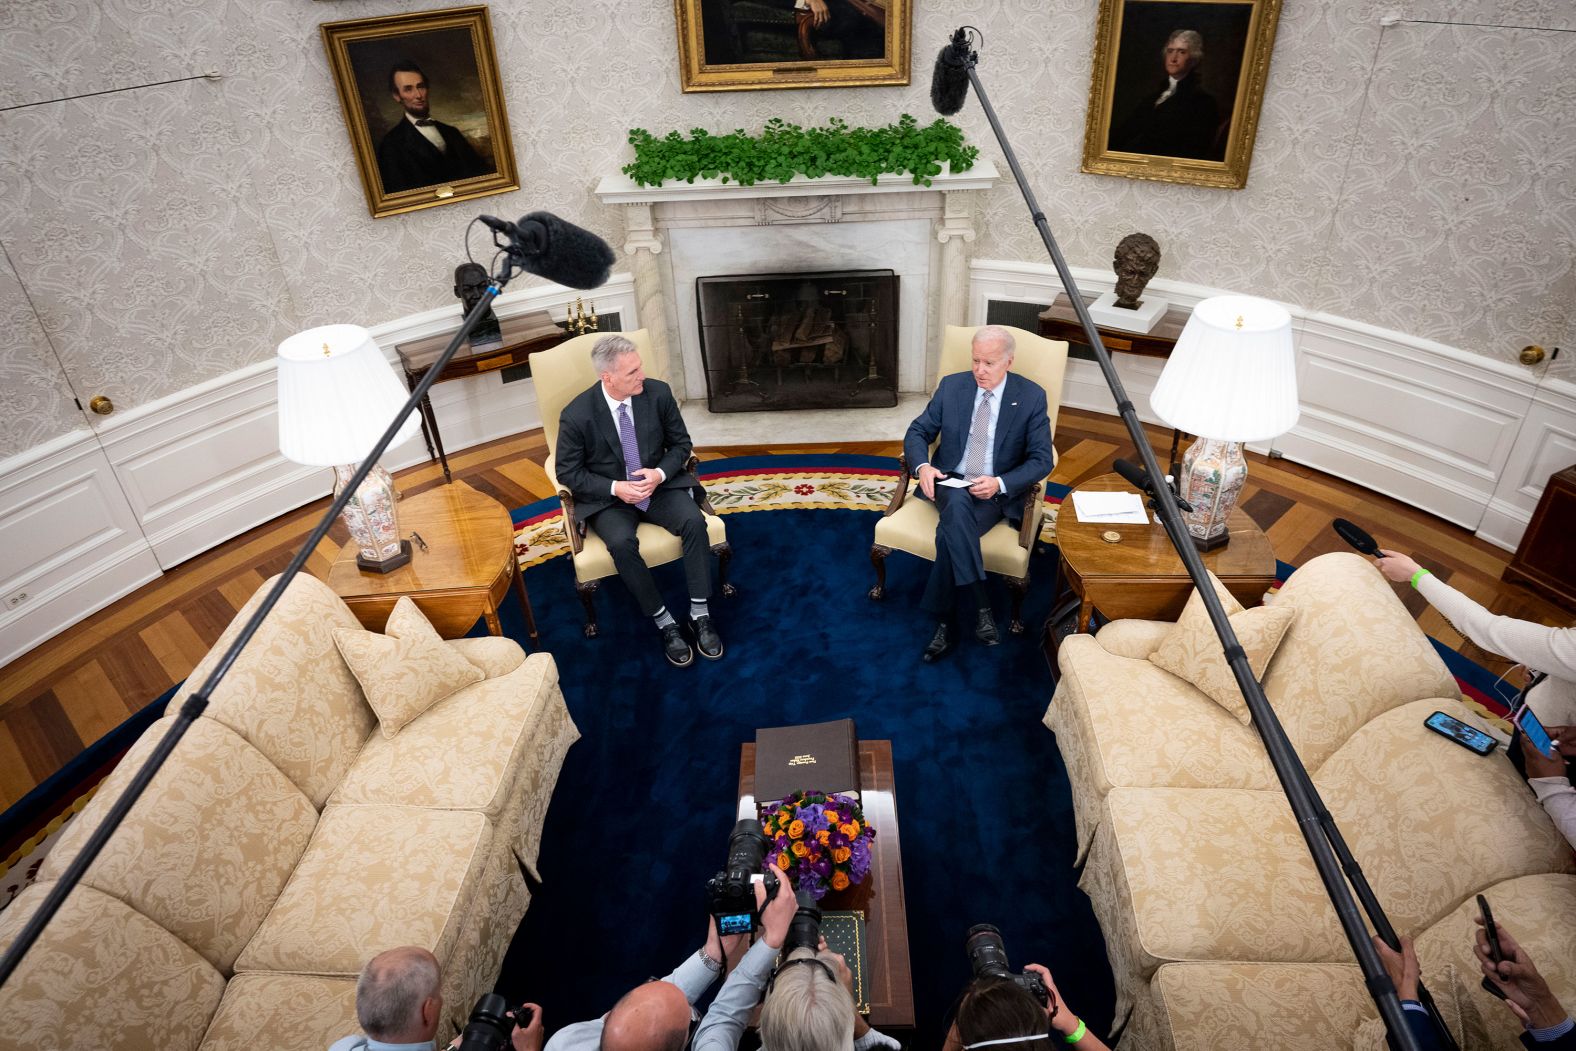 US House Speaker Kevin McCarthy, left, and US President Joe Biden meet in the White House Oval Office on Monday, May 22. McCarthy told Republicans during a closed-door meeting on Tuesday that he's <a href="index.php?page=&url=https%3A%2F%2Fwww.cnn.com%2F2023%2F05%2F23%2Fpolitics%2Fdebt-ceiling-tuesday%2Findex.html" target="_blank">not close to a bipartisan deal with Biden</a> to avoid a first-ever default on the nation's debt.